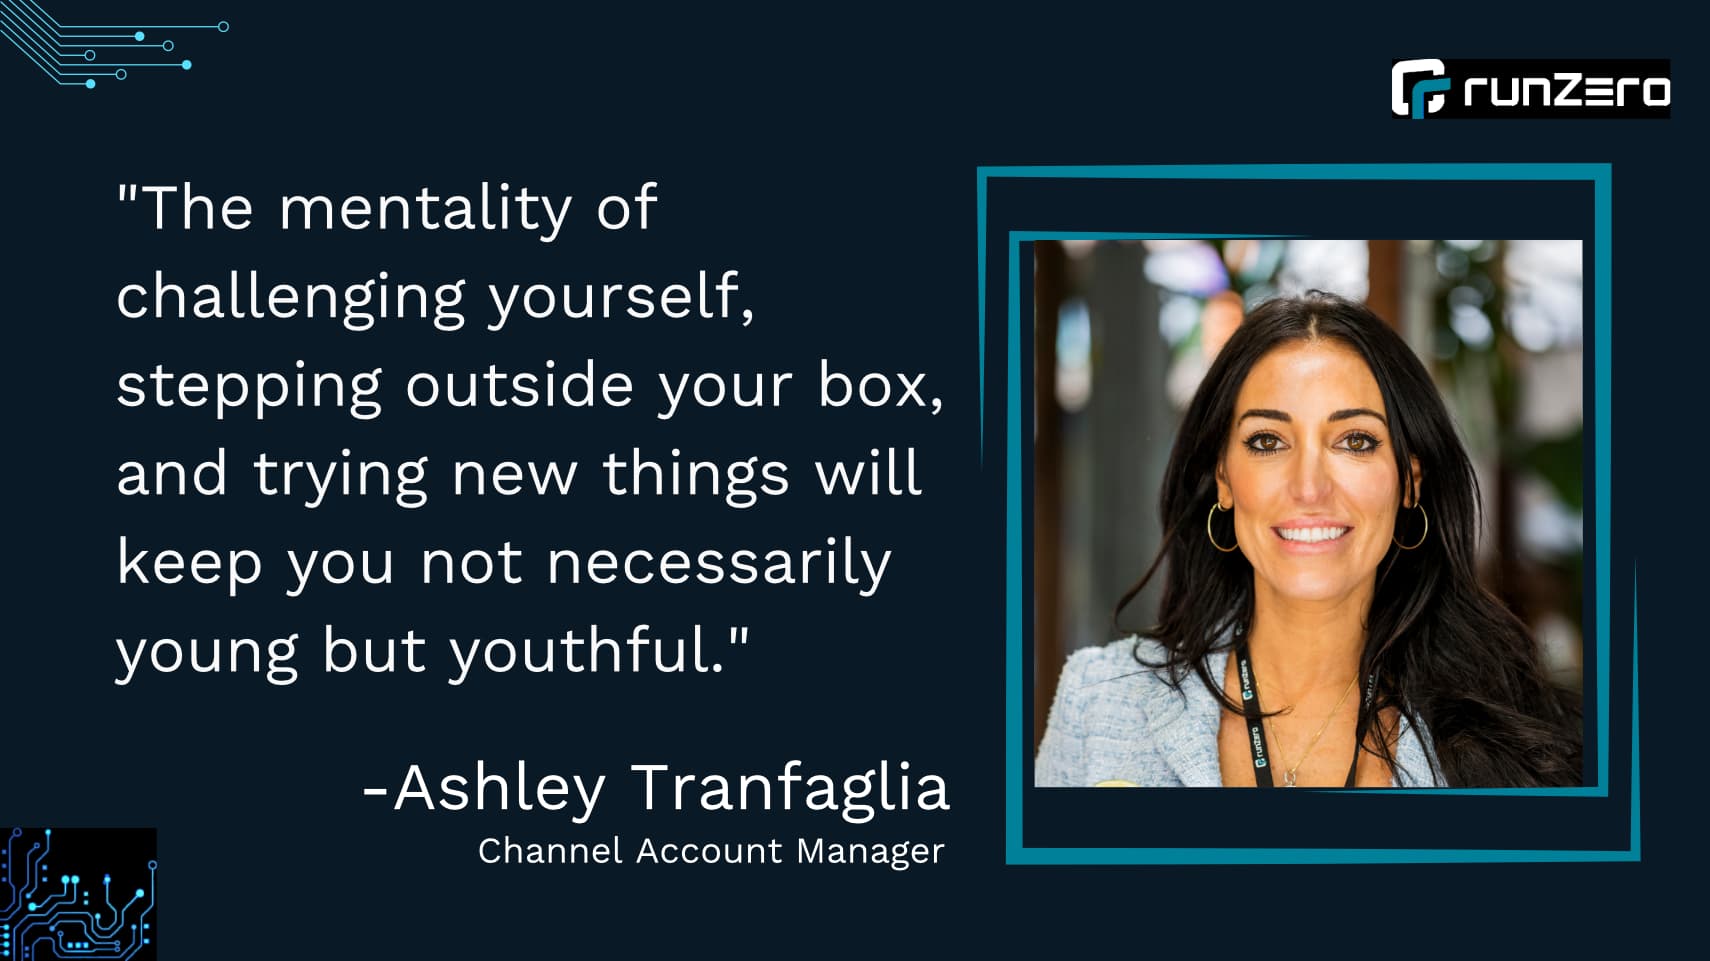 "The mentality of challenging yourself, stepping outside your box, and trying new things will keep you not necessarily young but youthful."